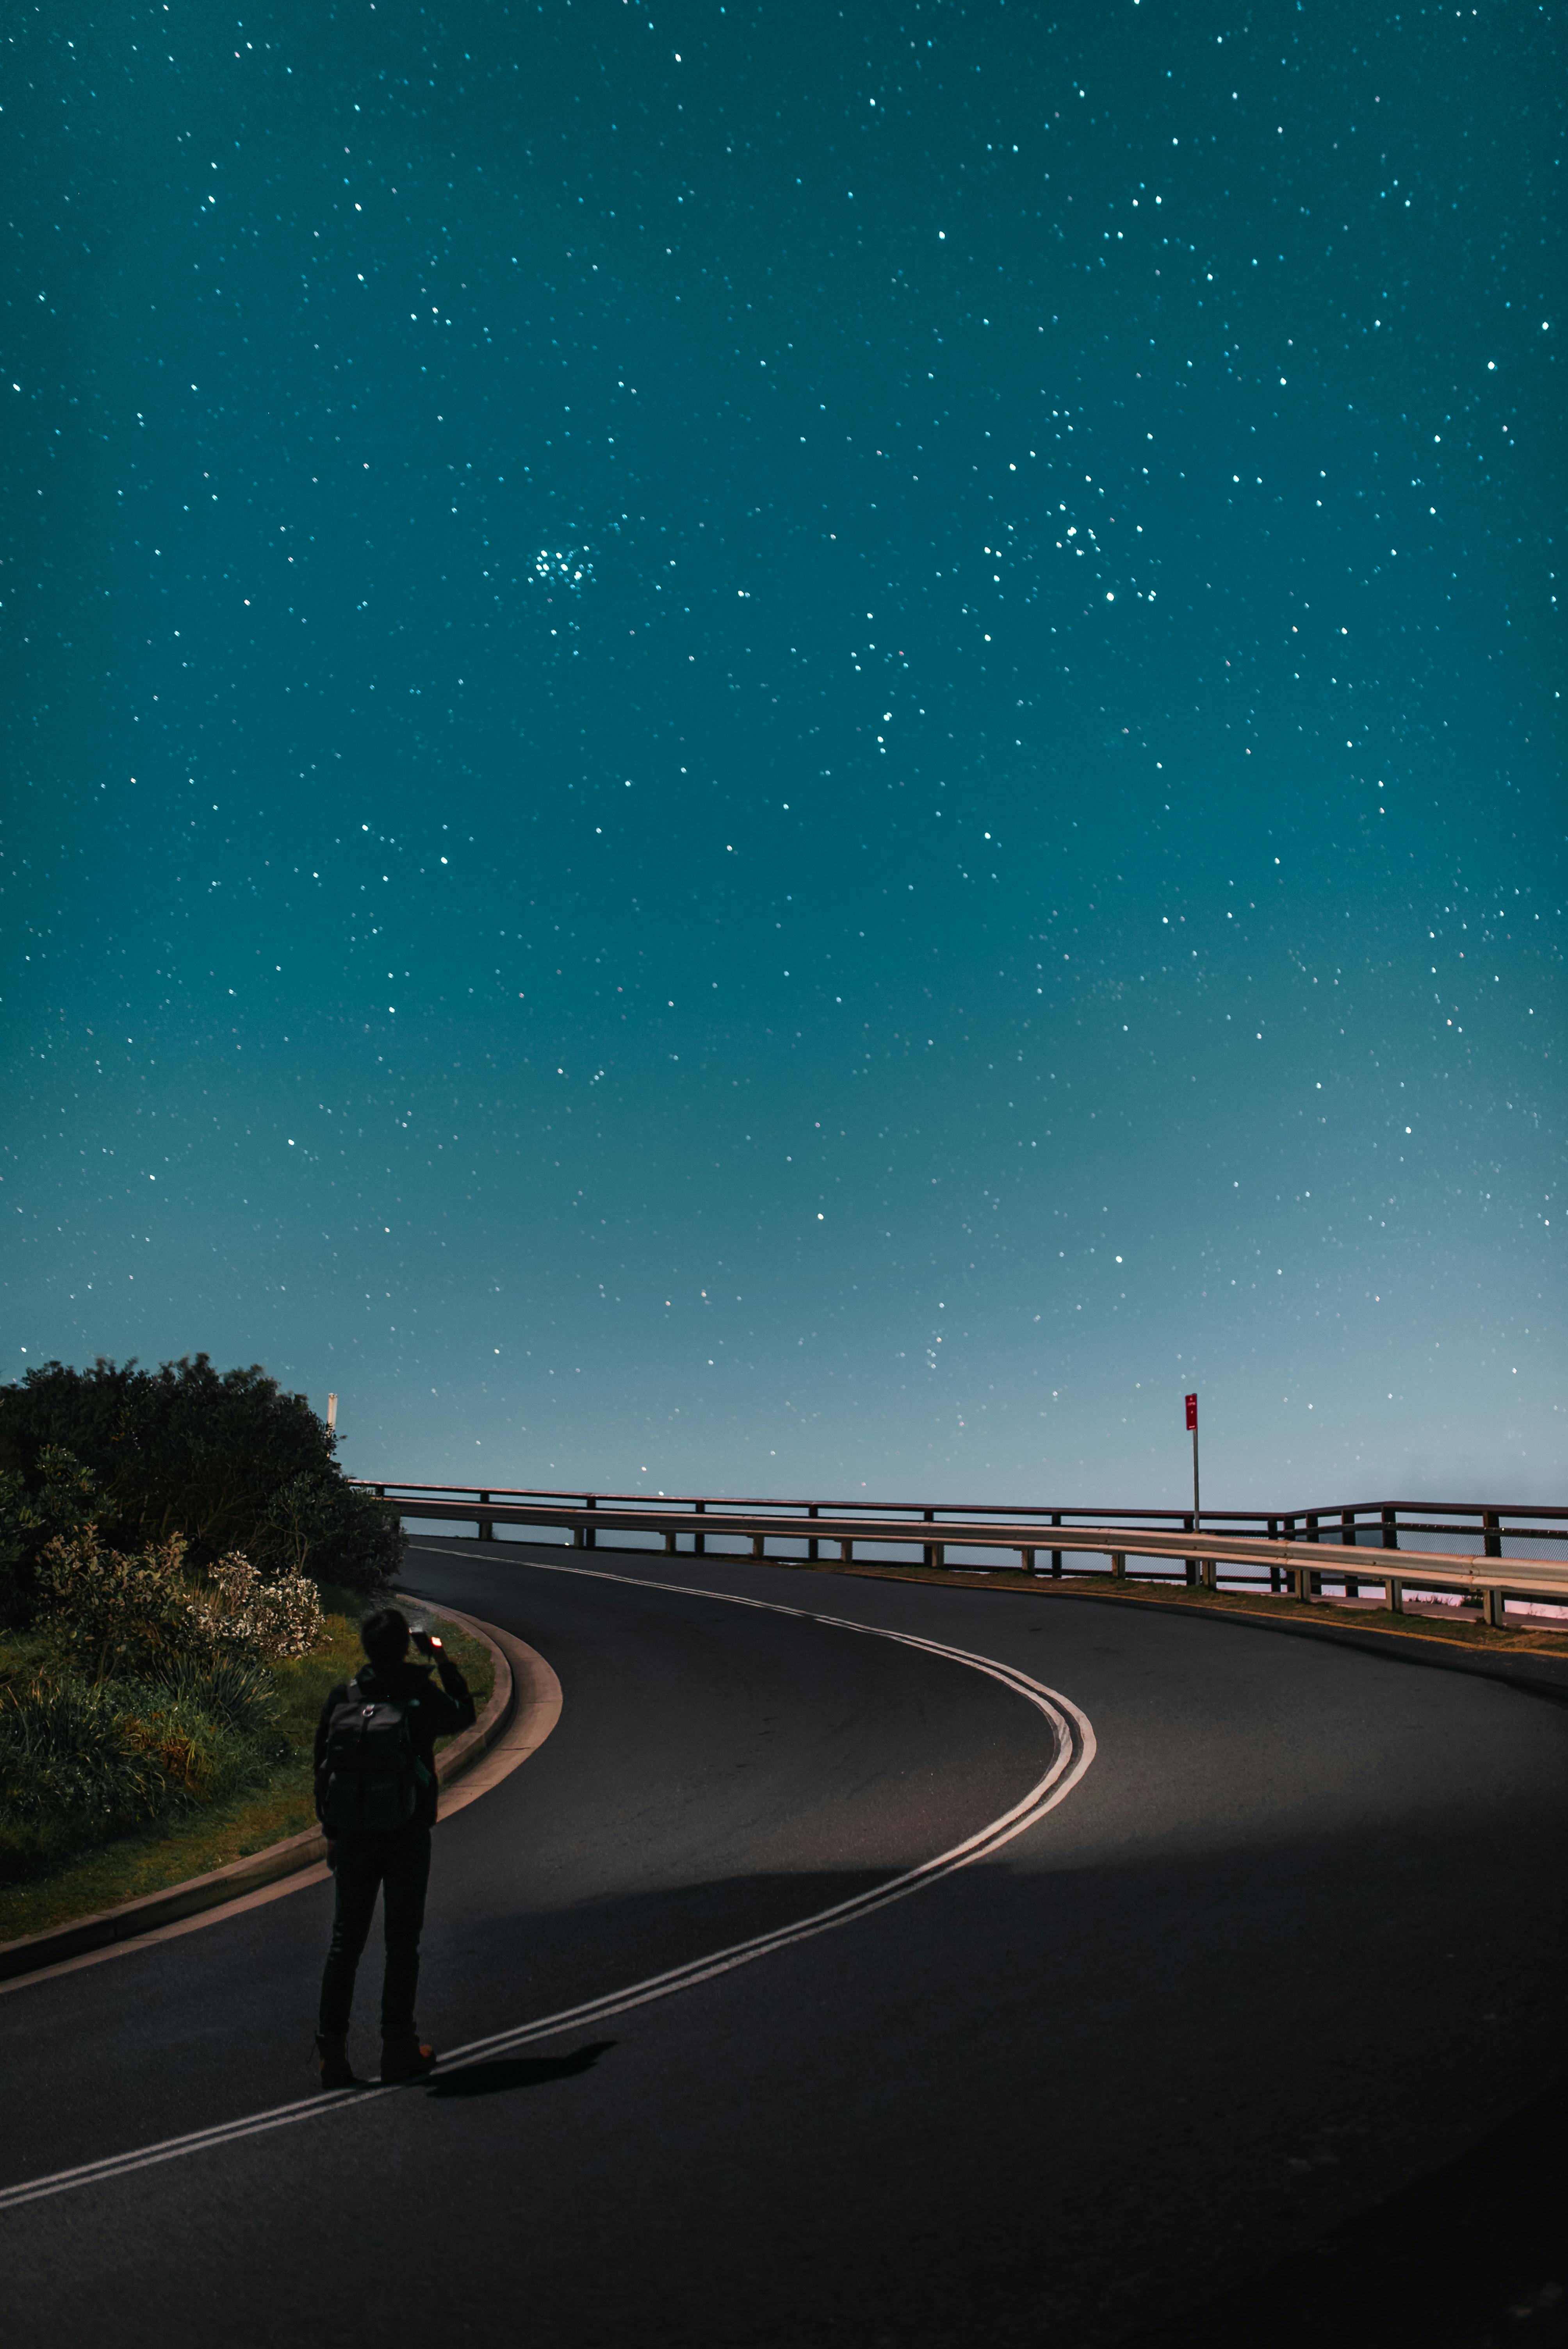 anonymous tourist taking photo of starry sky while standing on road